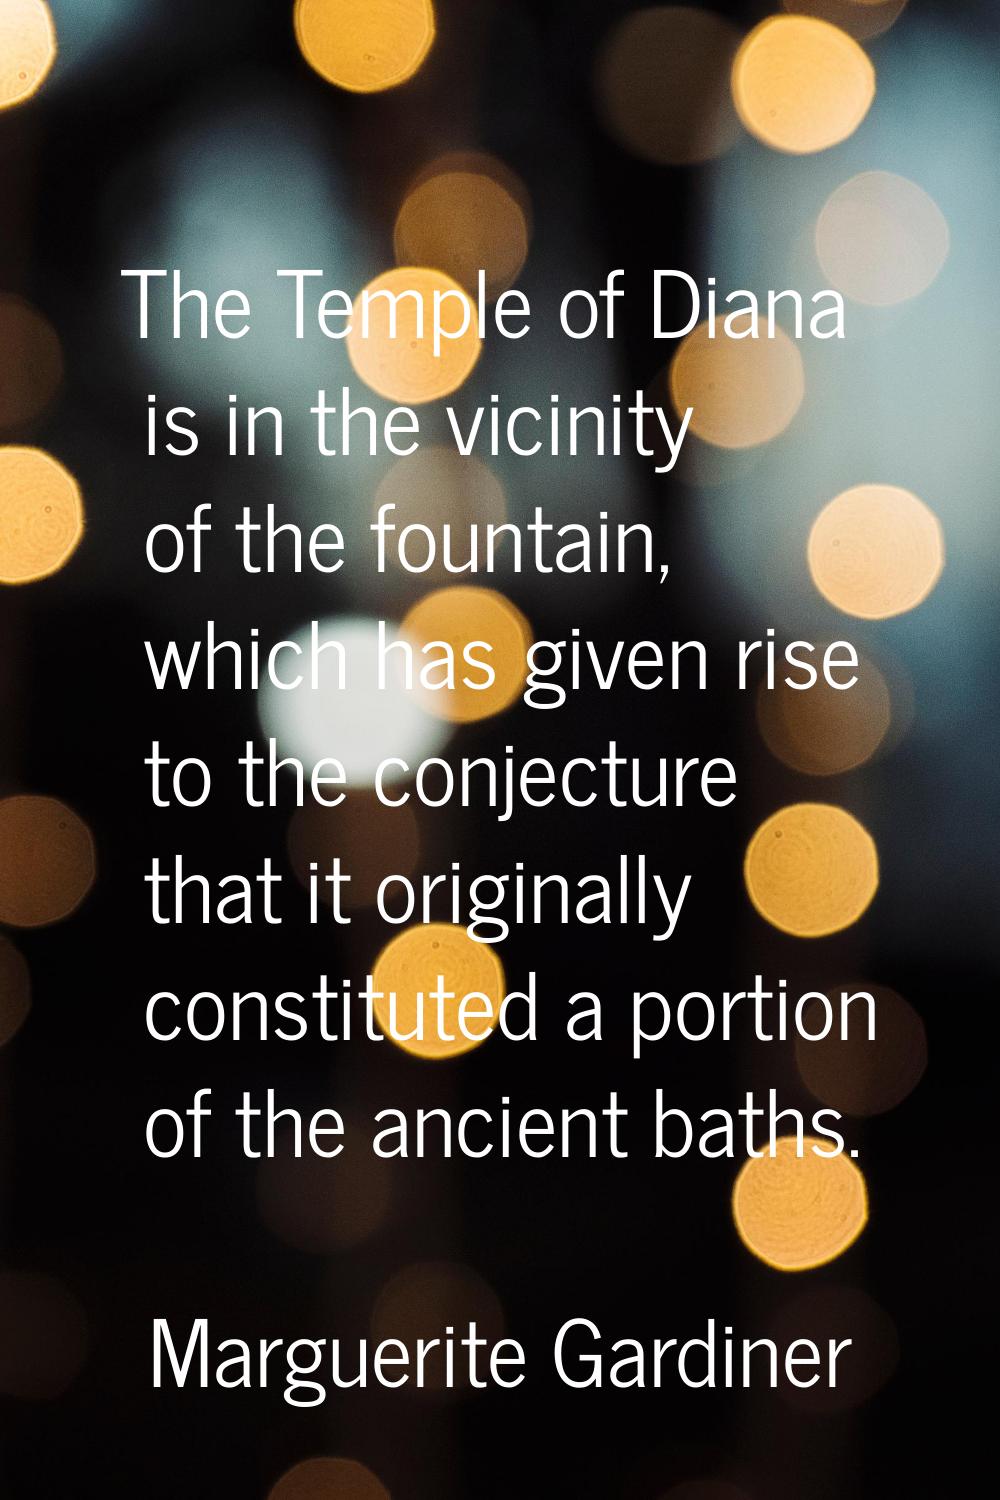 The Temple of Diana is in the vicinity of the fountain, which has given rise to the conjecture that